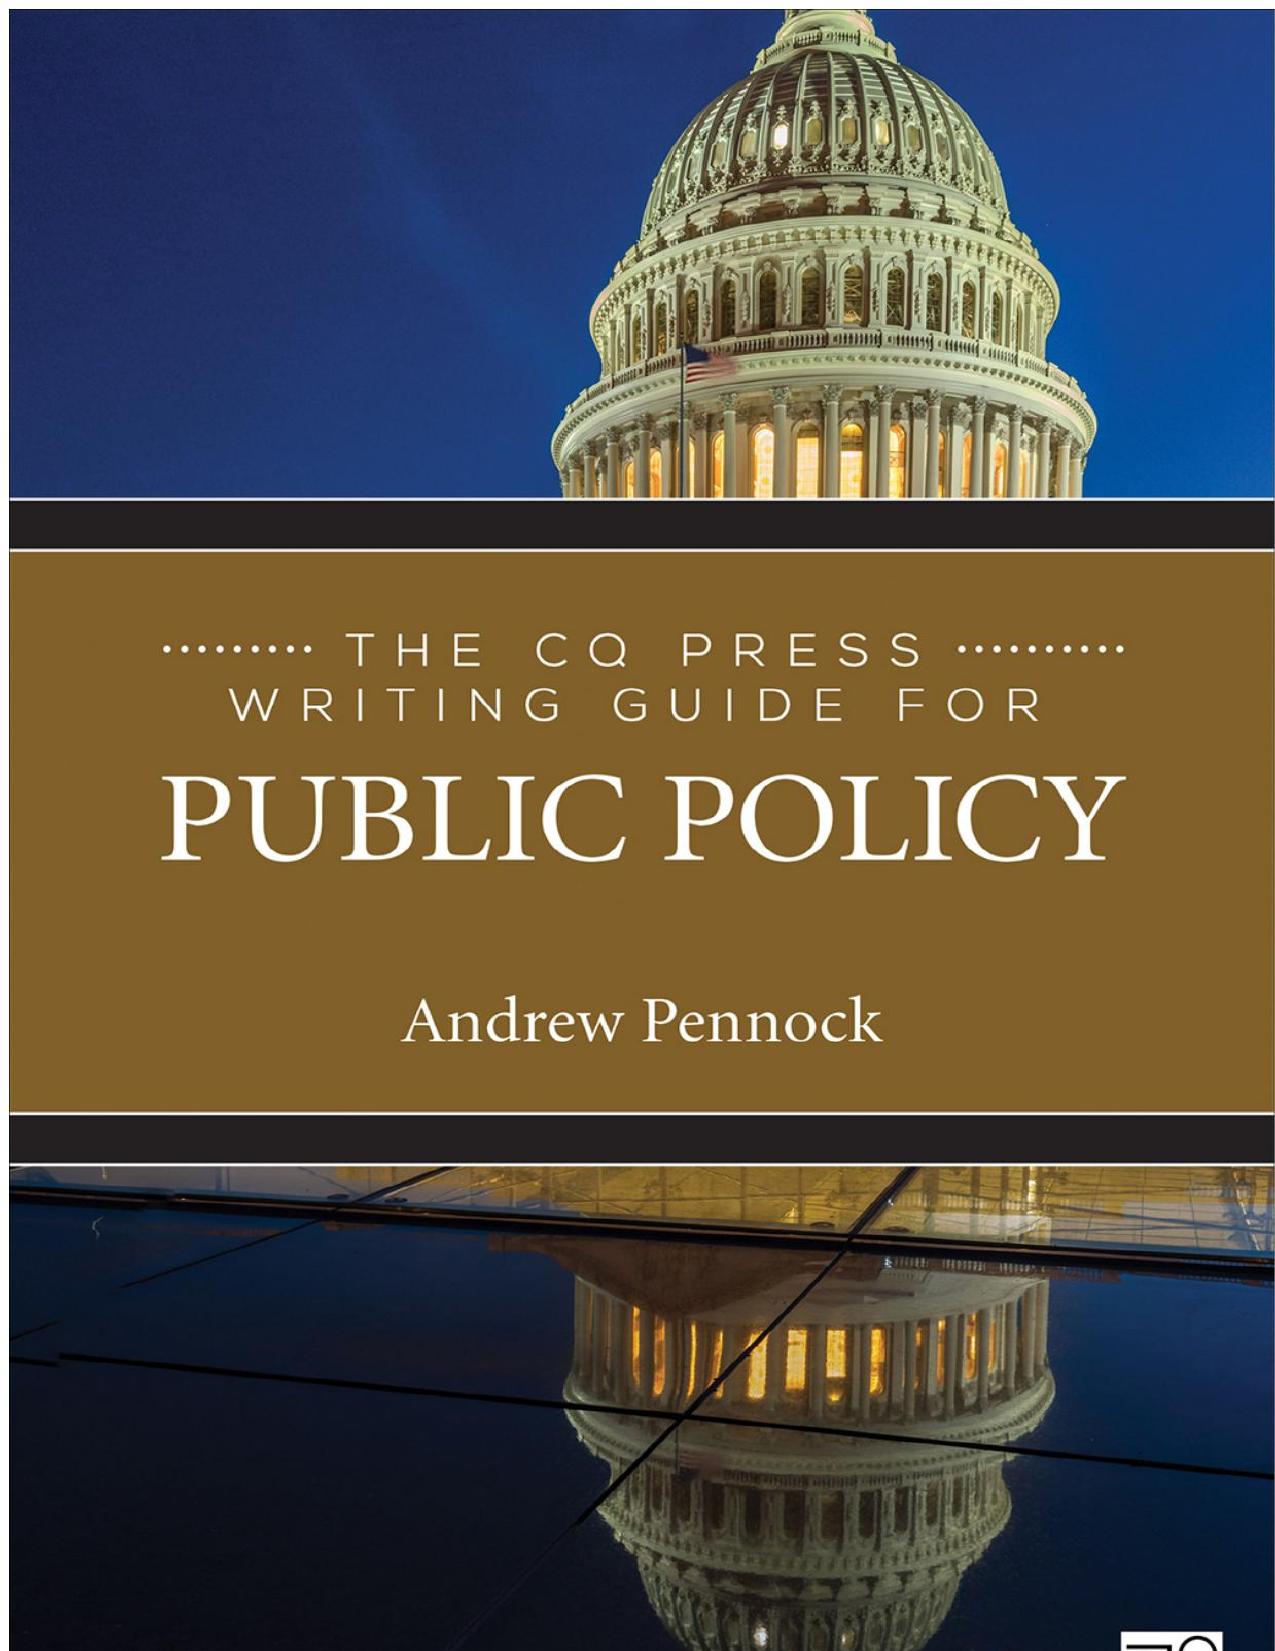 CQ Press Writing Guide for Public Policy 1st Edition, The.jpg